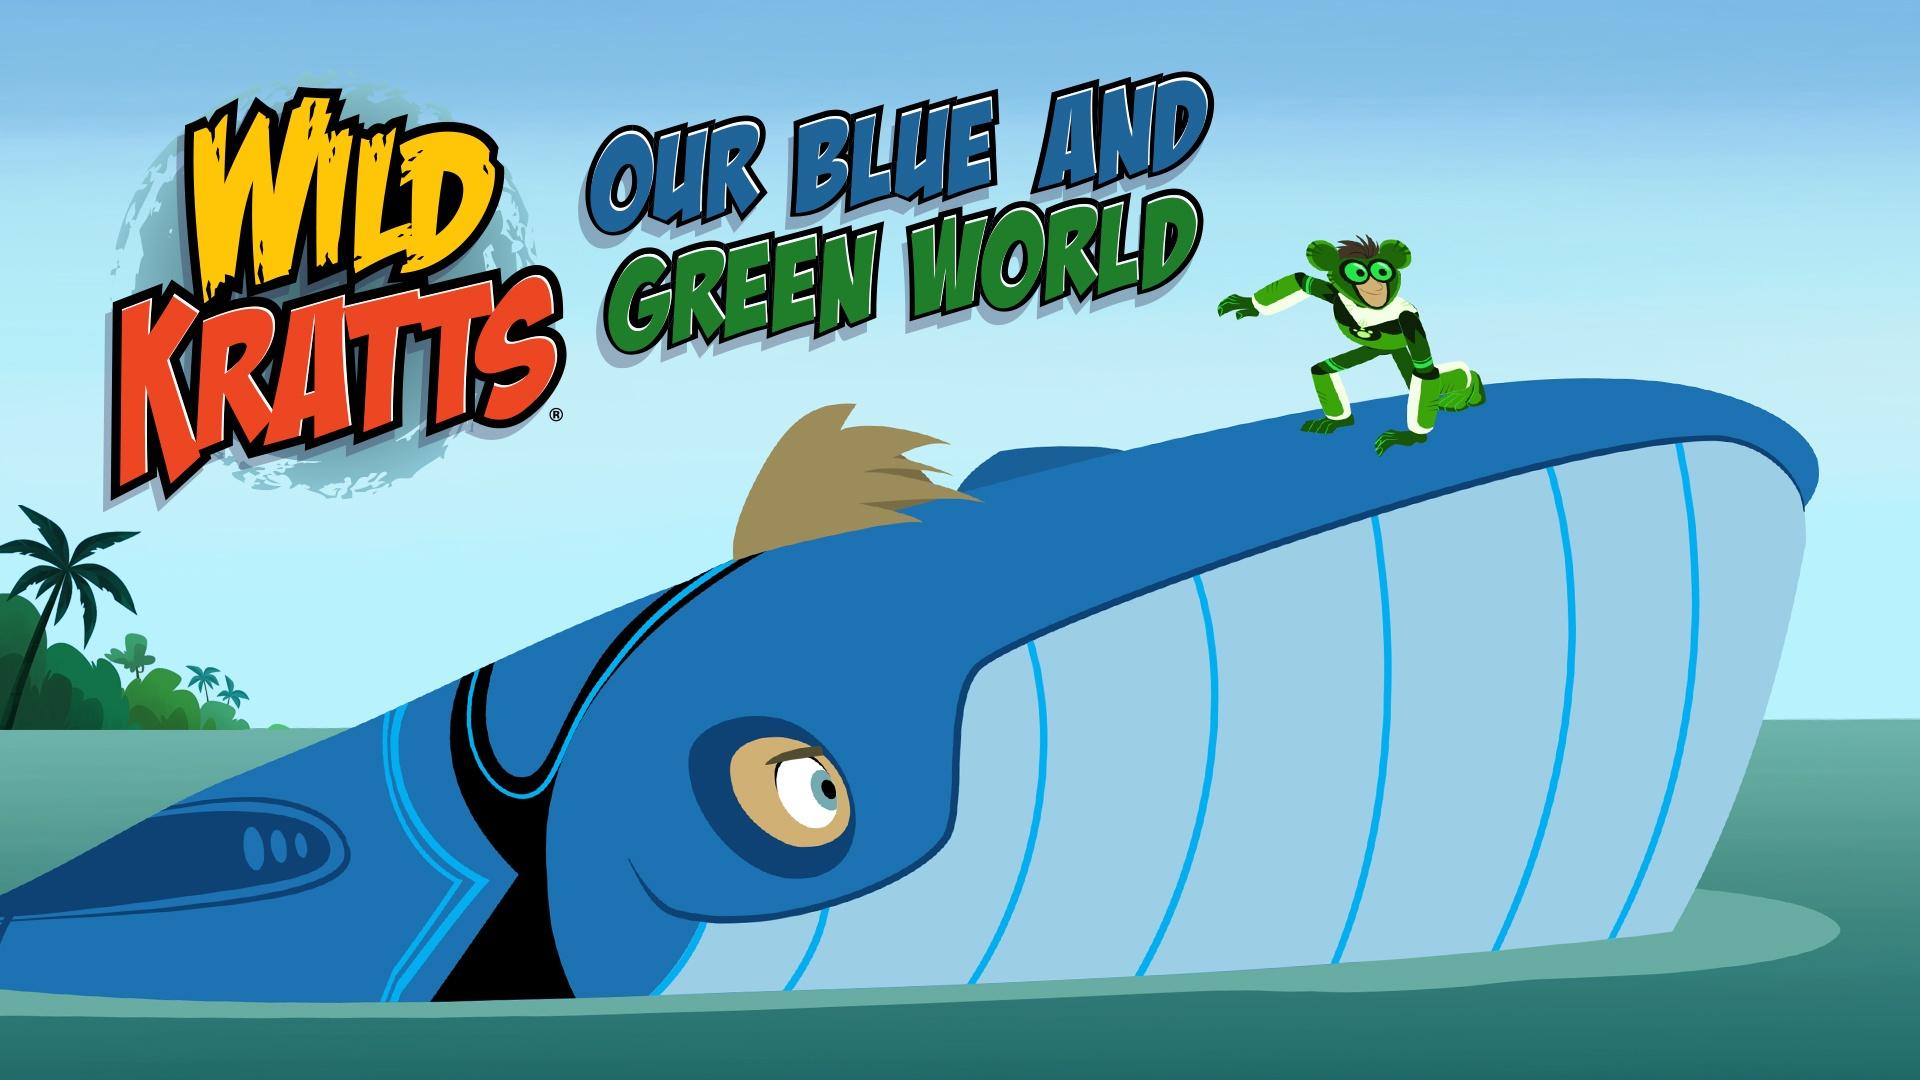 Cartoon image of whale from Wild Kratts: Our Blue and Green World